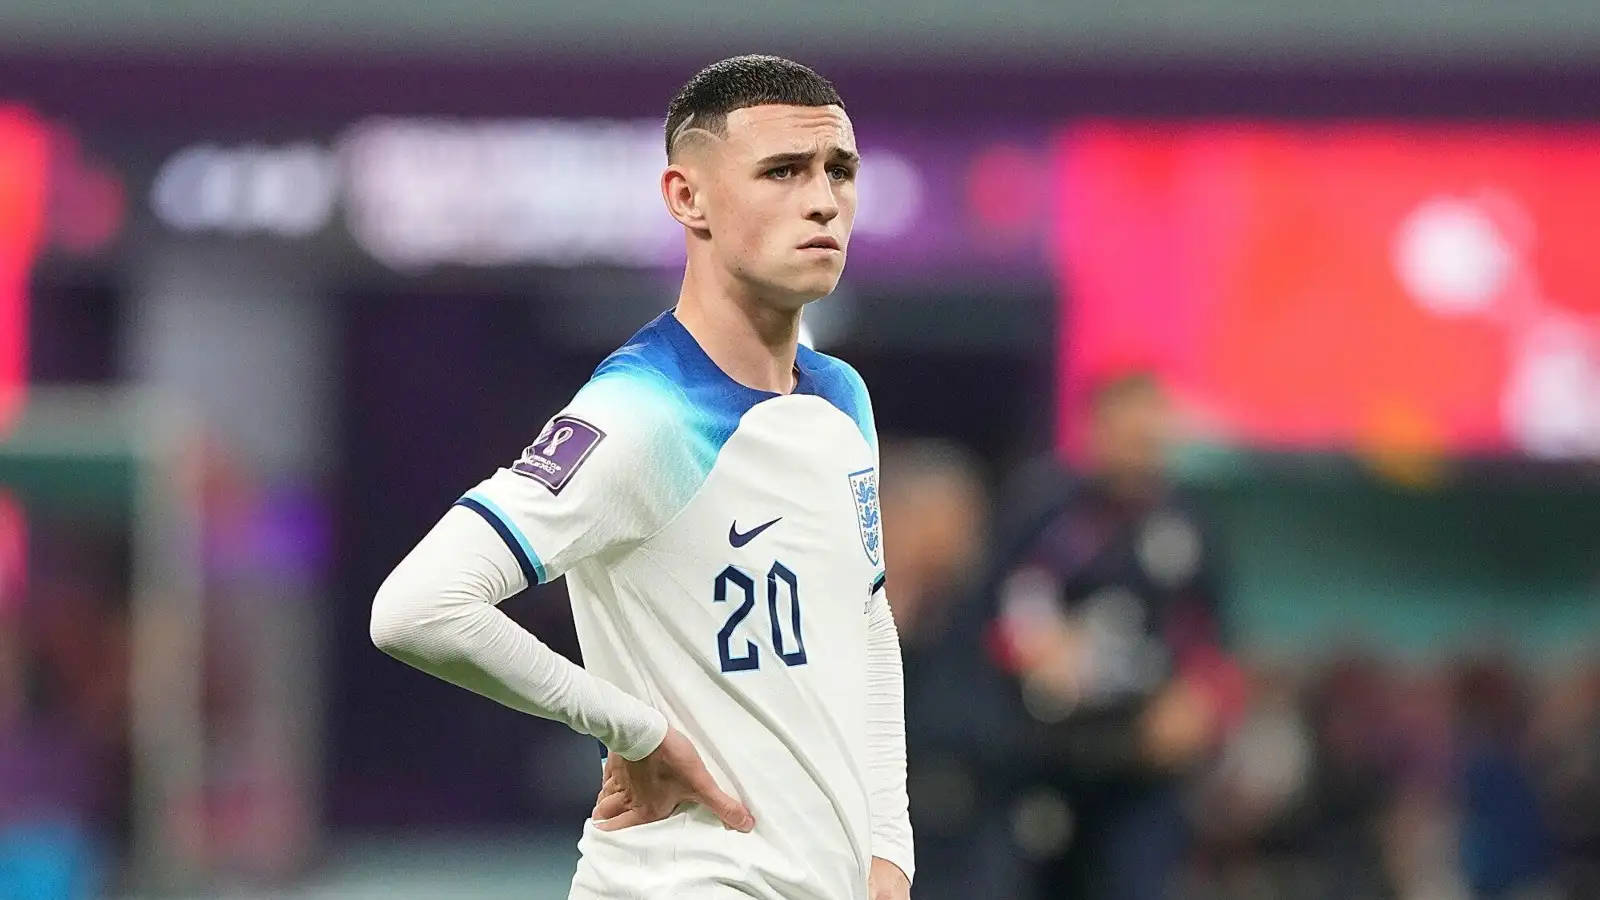 Comparing Phil Foden’s stats to England’s other attacking options